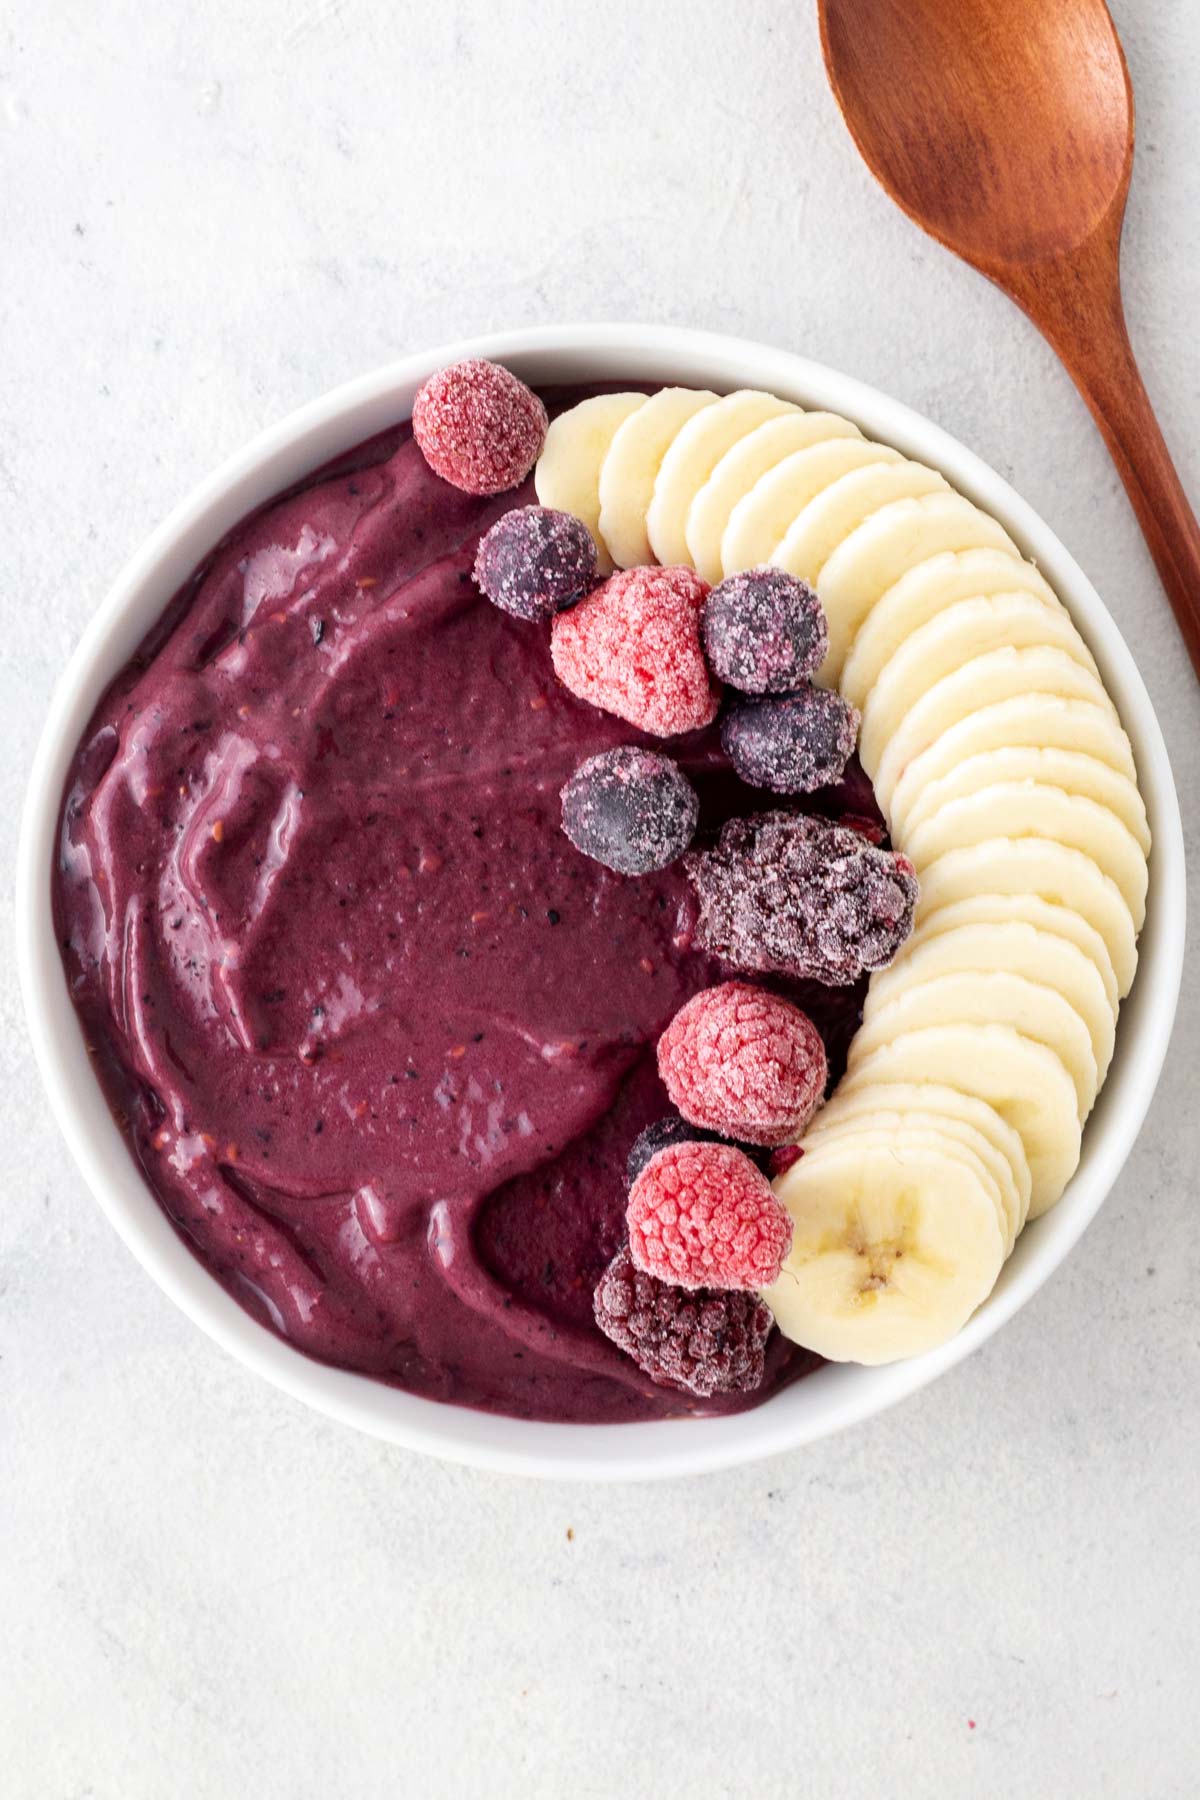 Acai smoothie bowl on a gray table.